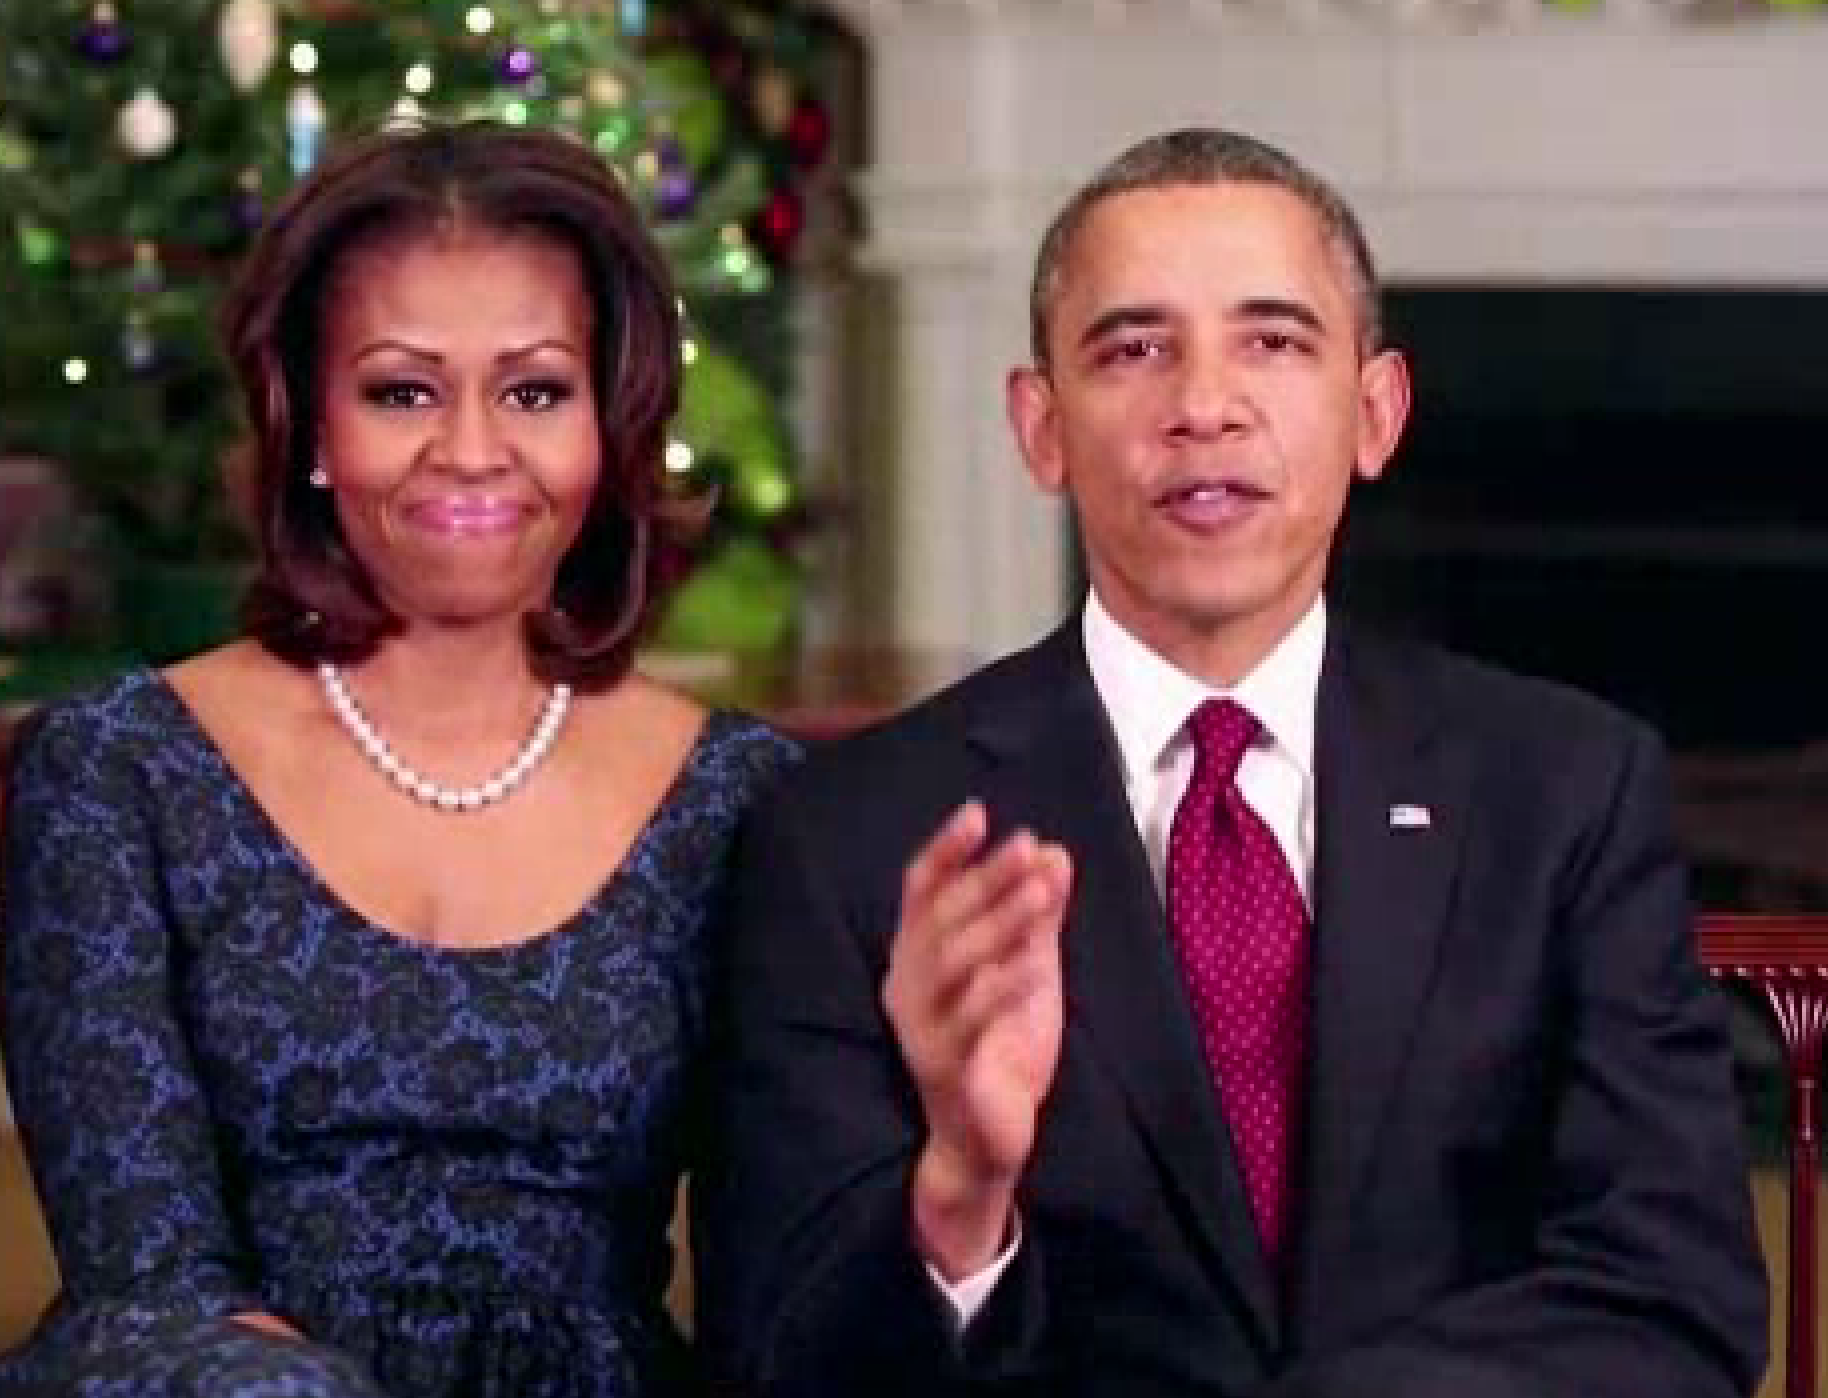 The Obama's at Christmas